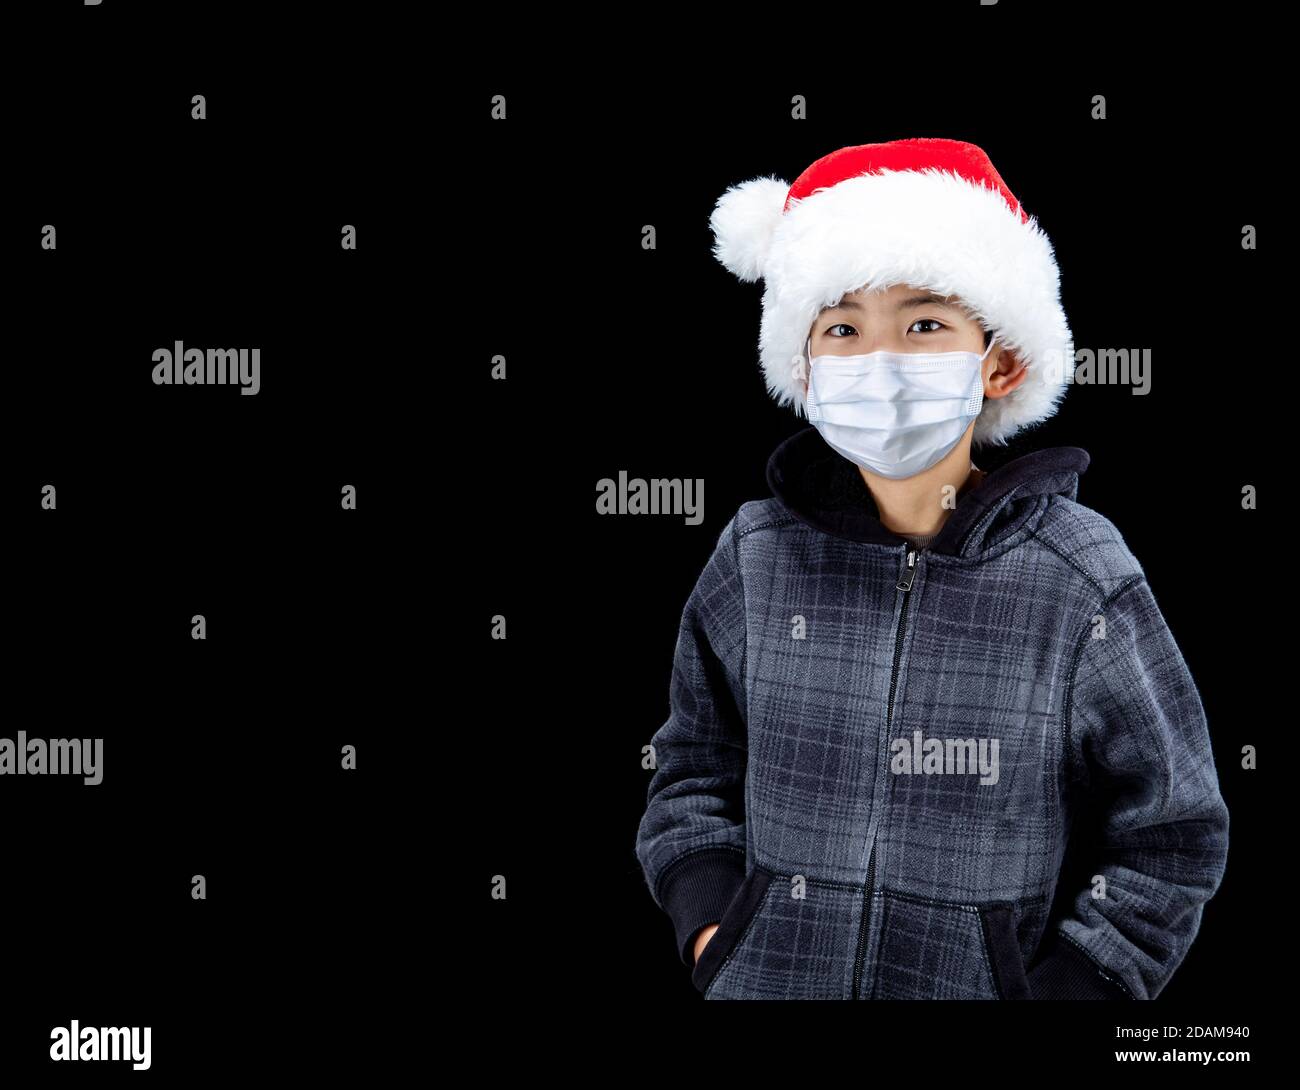 Cute boy during Covid Christmas wearing Santa hat and face mask due to pandamic, isolated on black background with copy space. Stock Photo